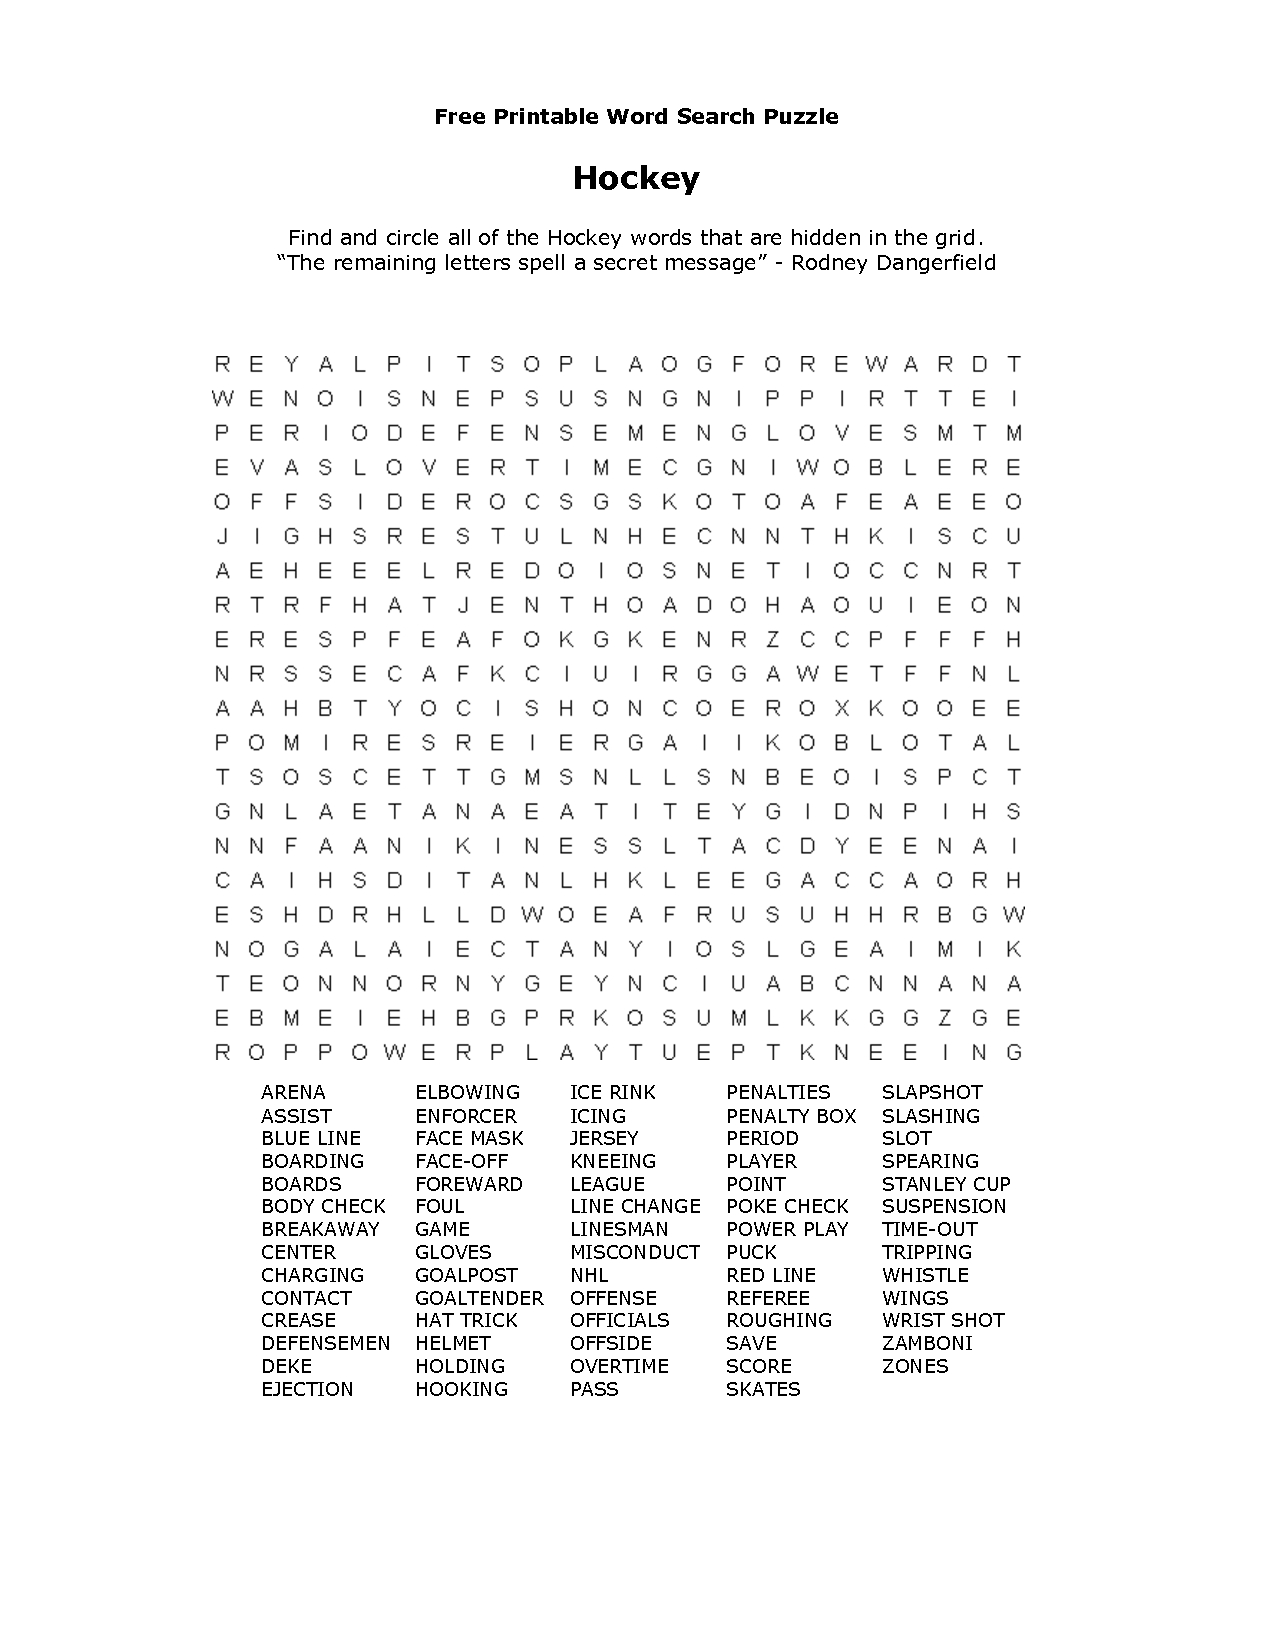 Free Printable Word Searches | طلال | Free Printable Word Searches - Free Printable Word Searches For Adults